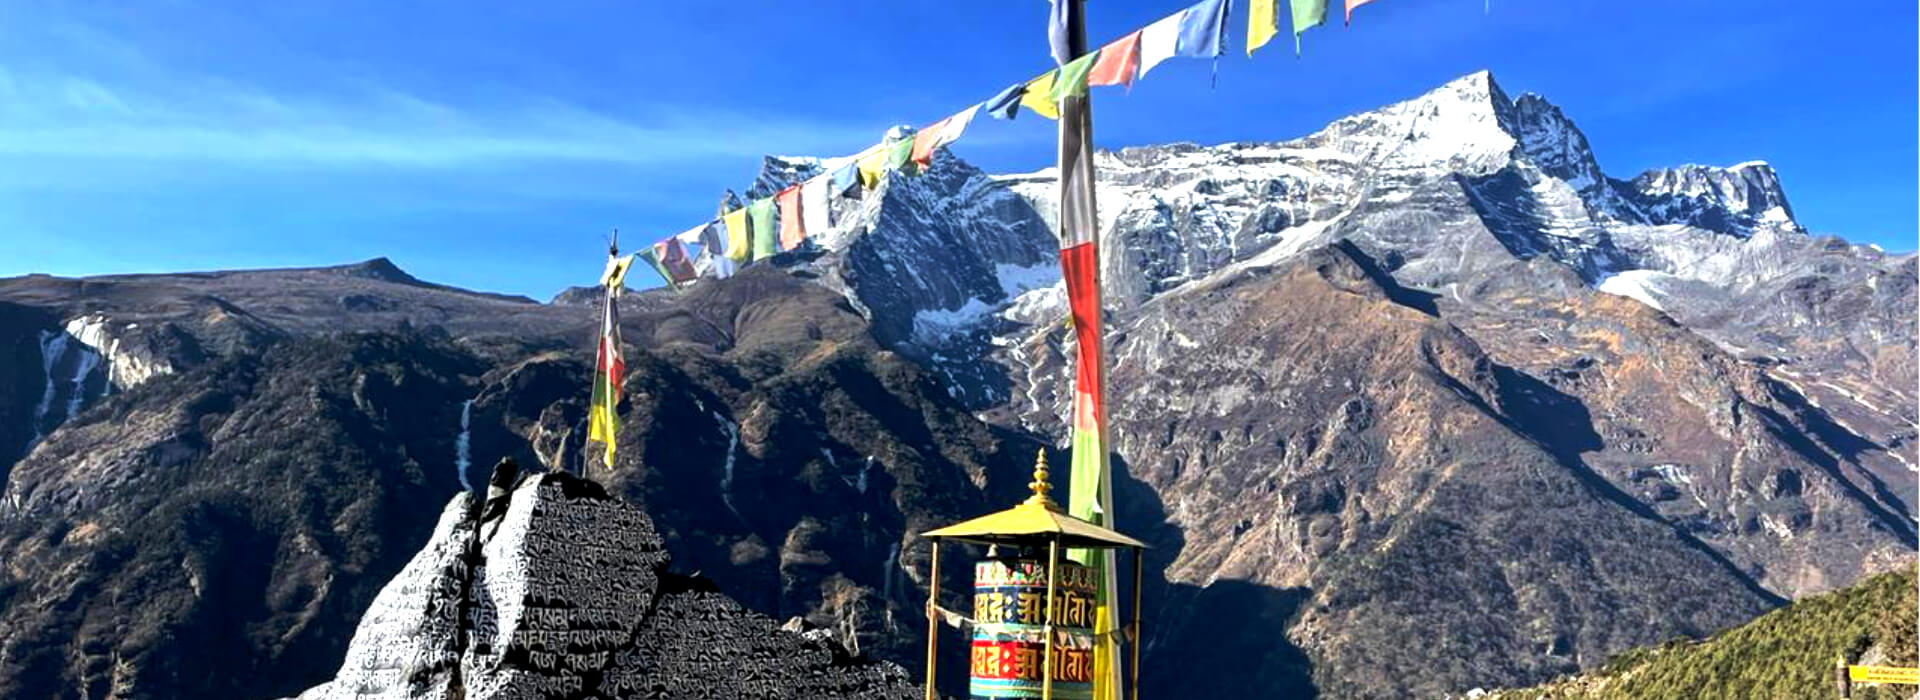 Everest Base camp Luxury Trek - Things to know before visiting Nepal